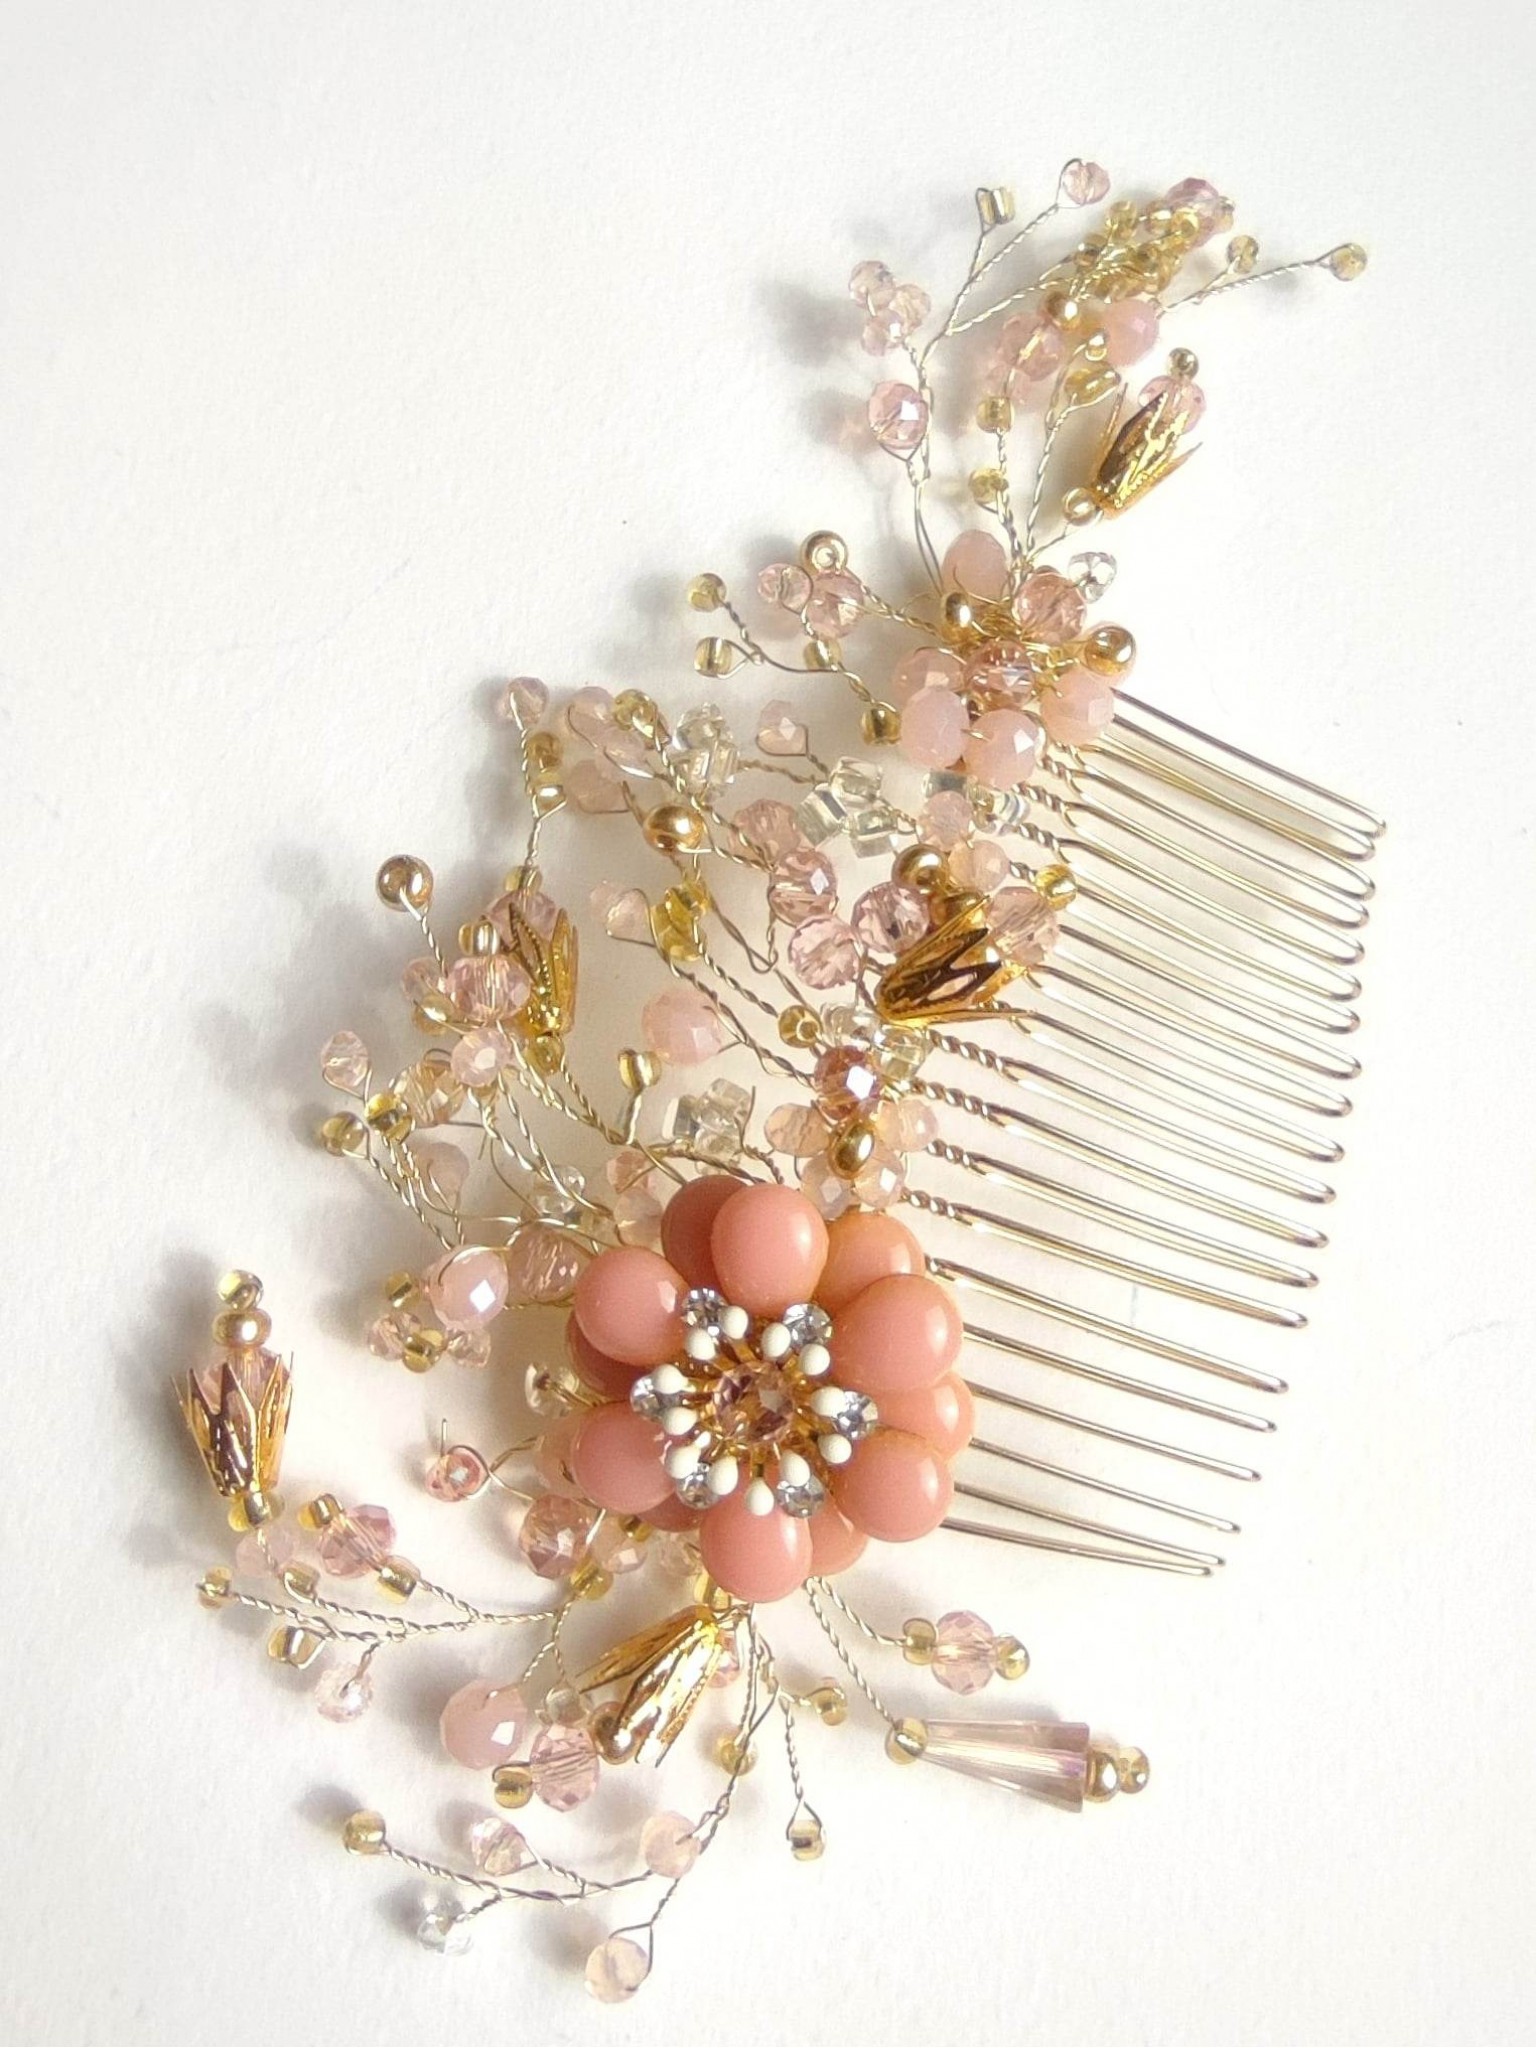 Beautiful Designer Hair Comb with Swarovski Crystals and Enameled Flower in Gold and Peach colors - Romantic Princess